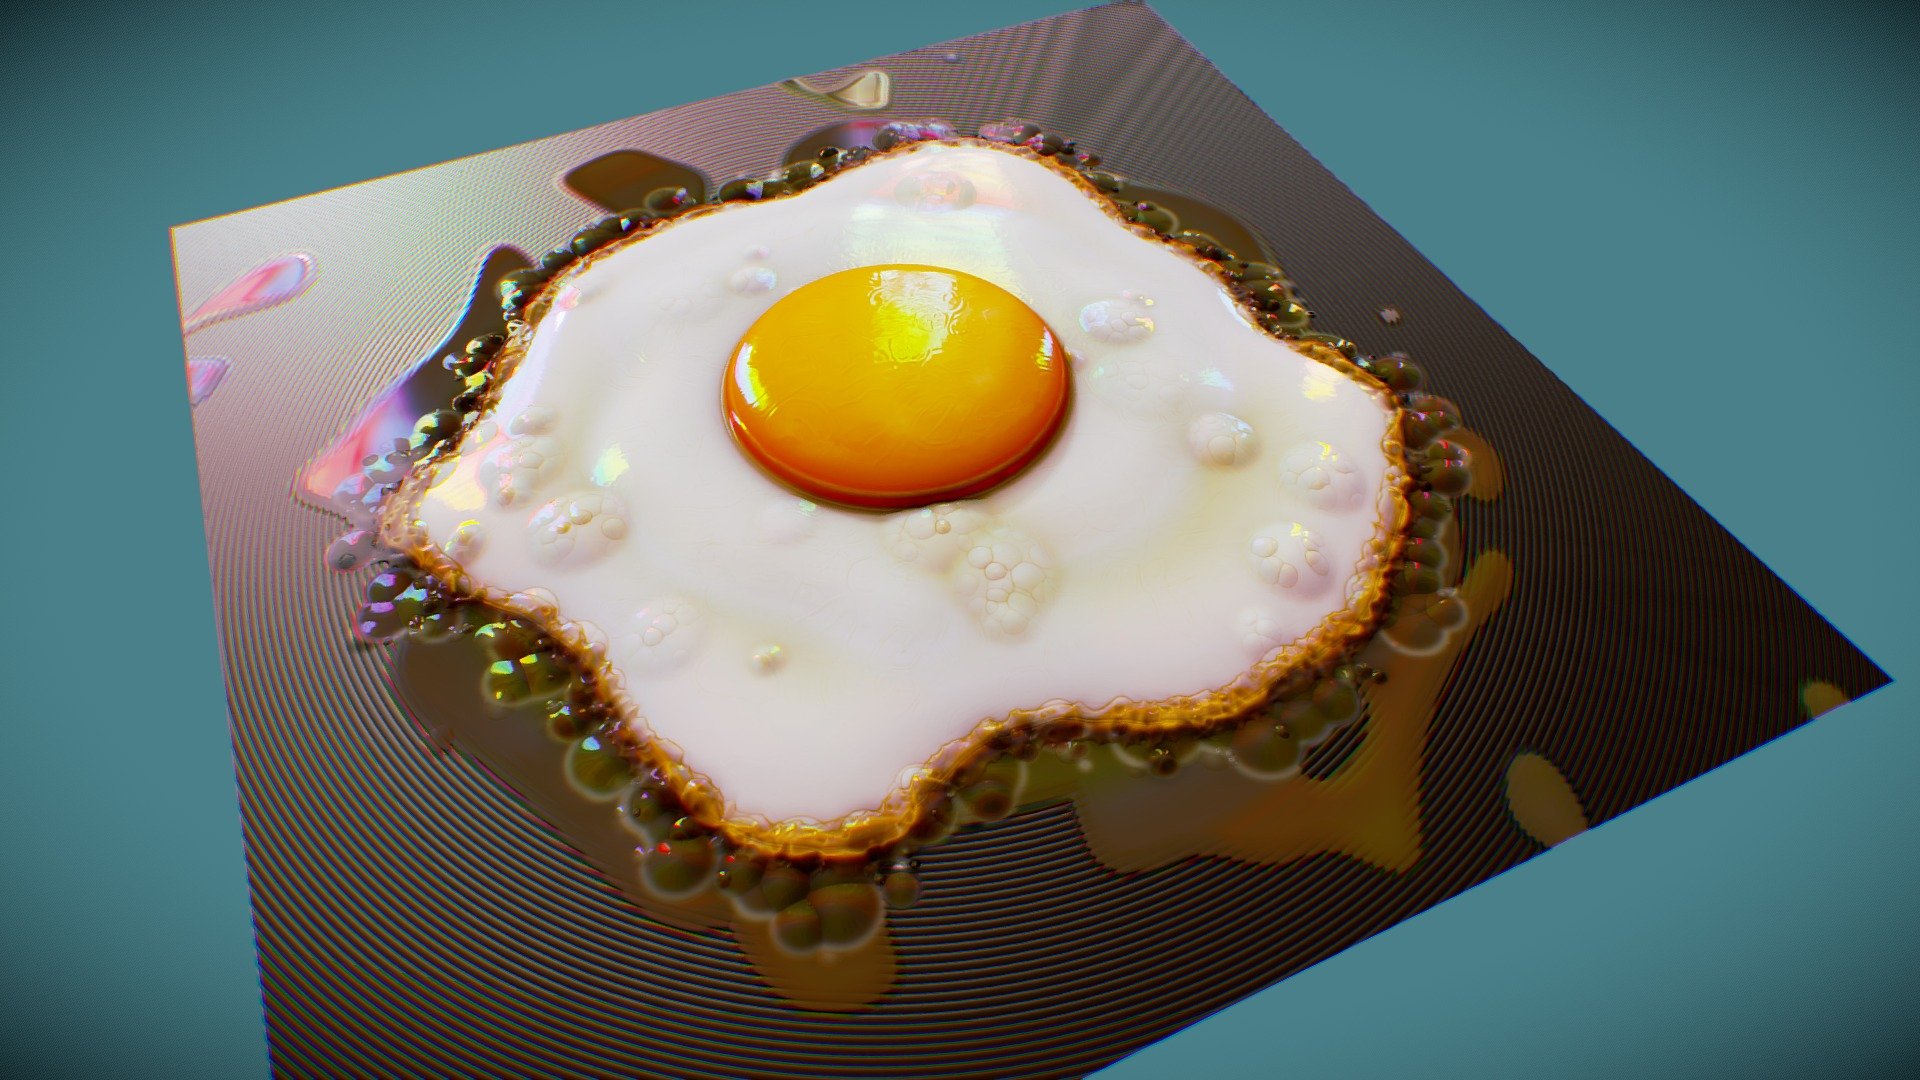 I used substance designer to make this for study
To express the cooking oil's spectrum, I used specular/glossiness map:3c - Fried eggs - 3D model by Binho Jeong (@binhoj) 3d model